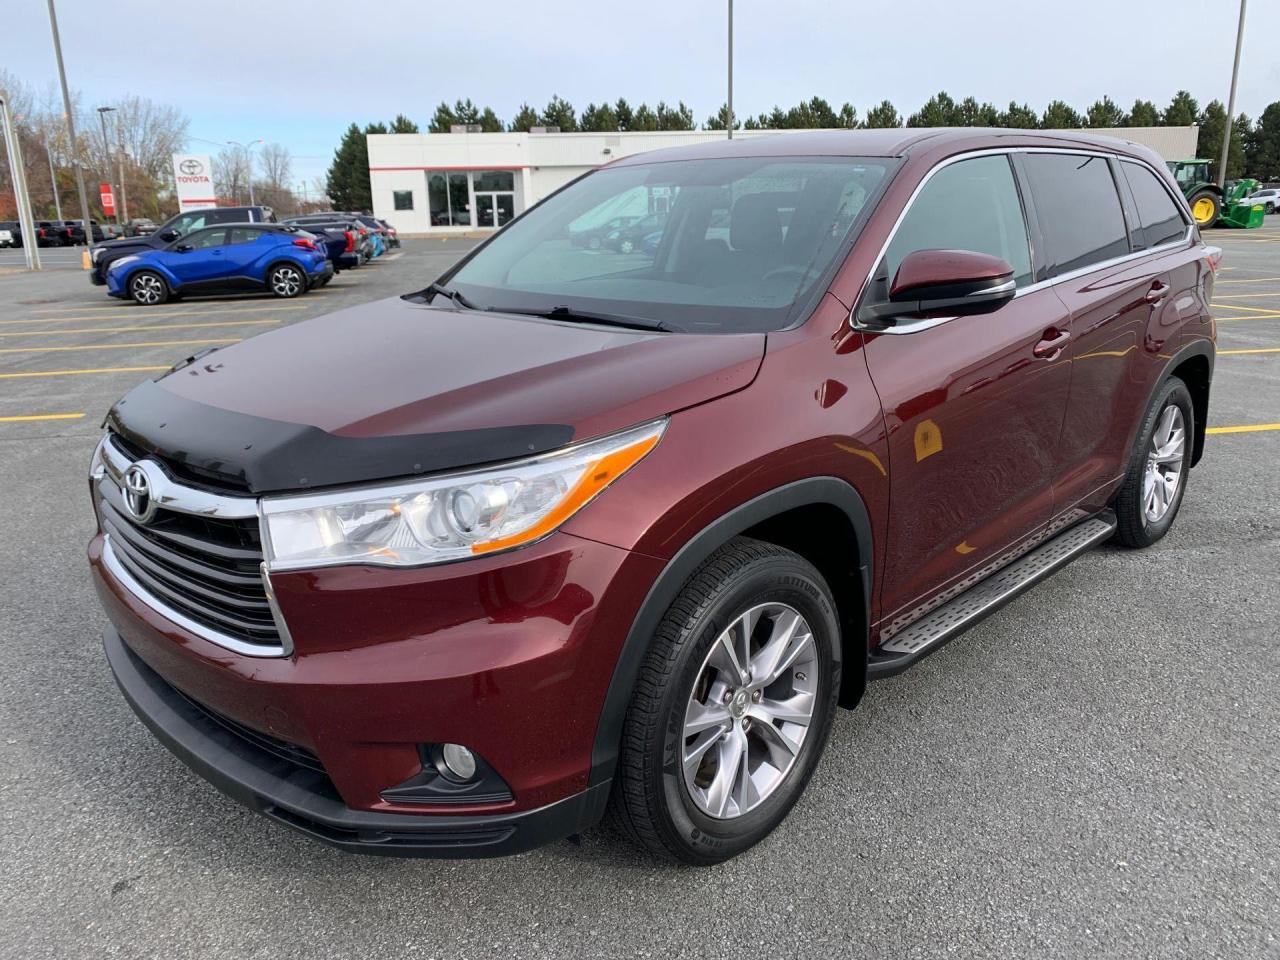 2014 Toyota Highlander ONLY 74,000 KMS-7PSGR-MINT=PRICED-QUICK SALE! - Photo #1